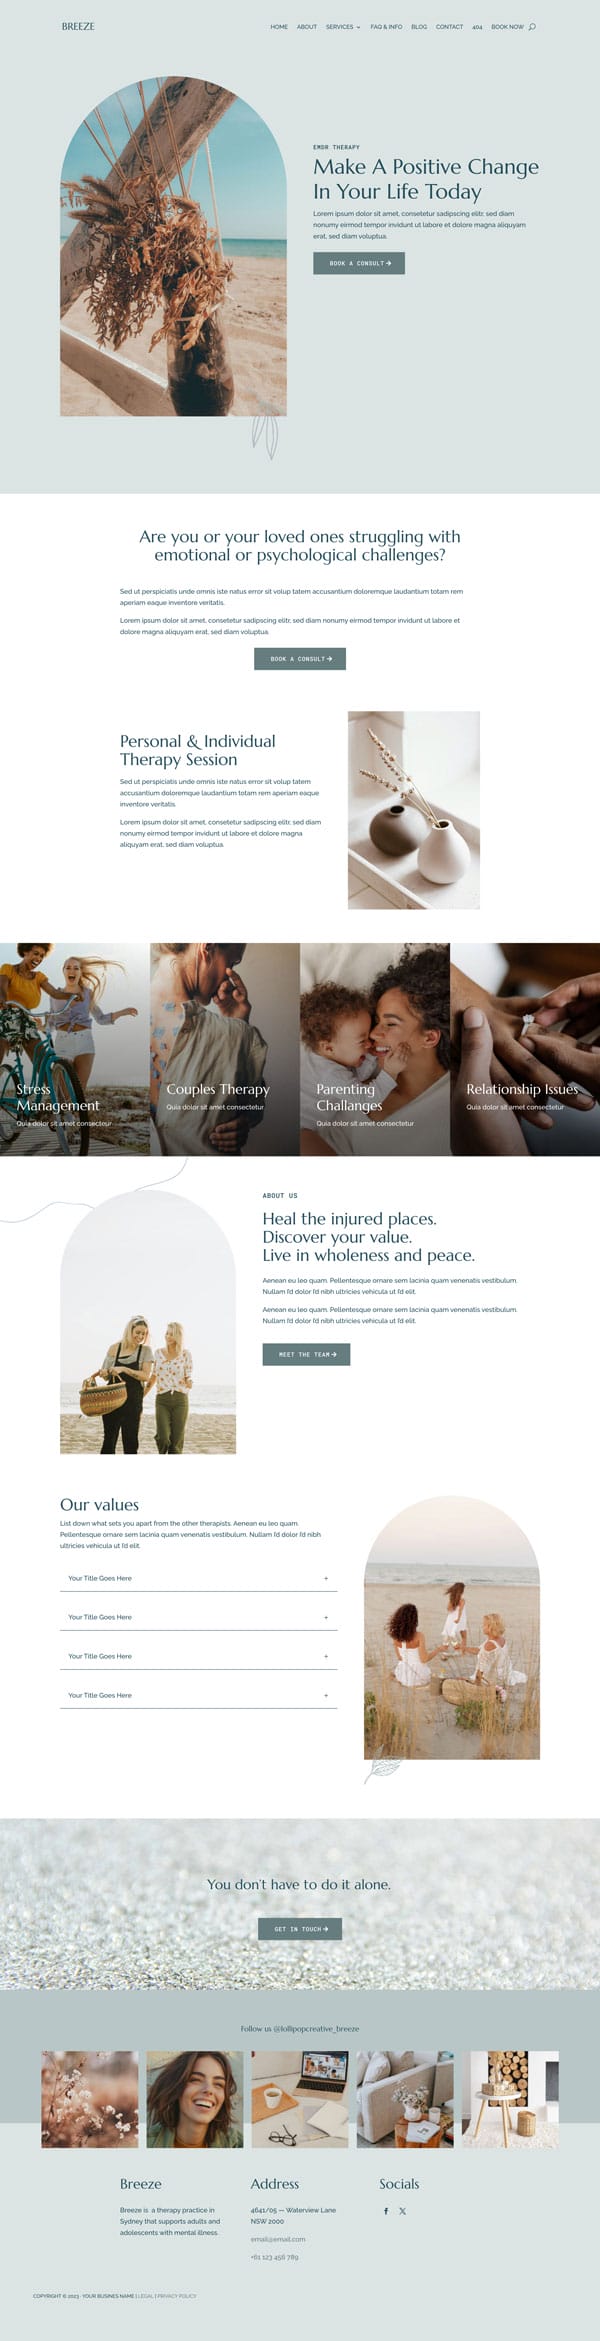 Website homepage design for a mental health therapy service, featuring calming images and sections about services, mission, and contact information. This site uses the Breeze WordPress Template optimised for psychologists.